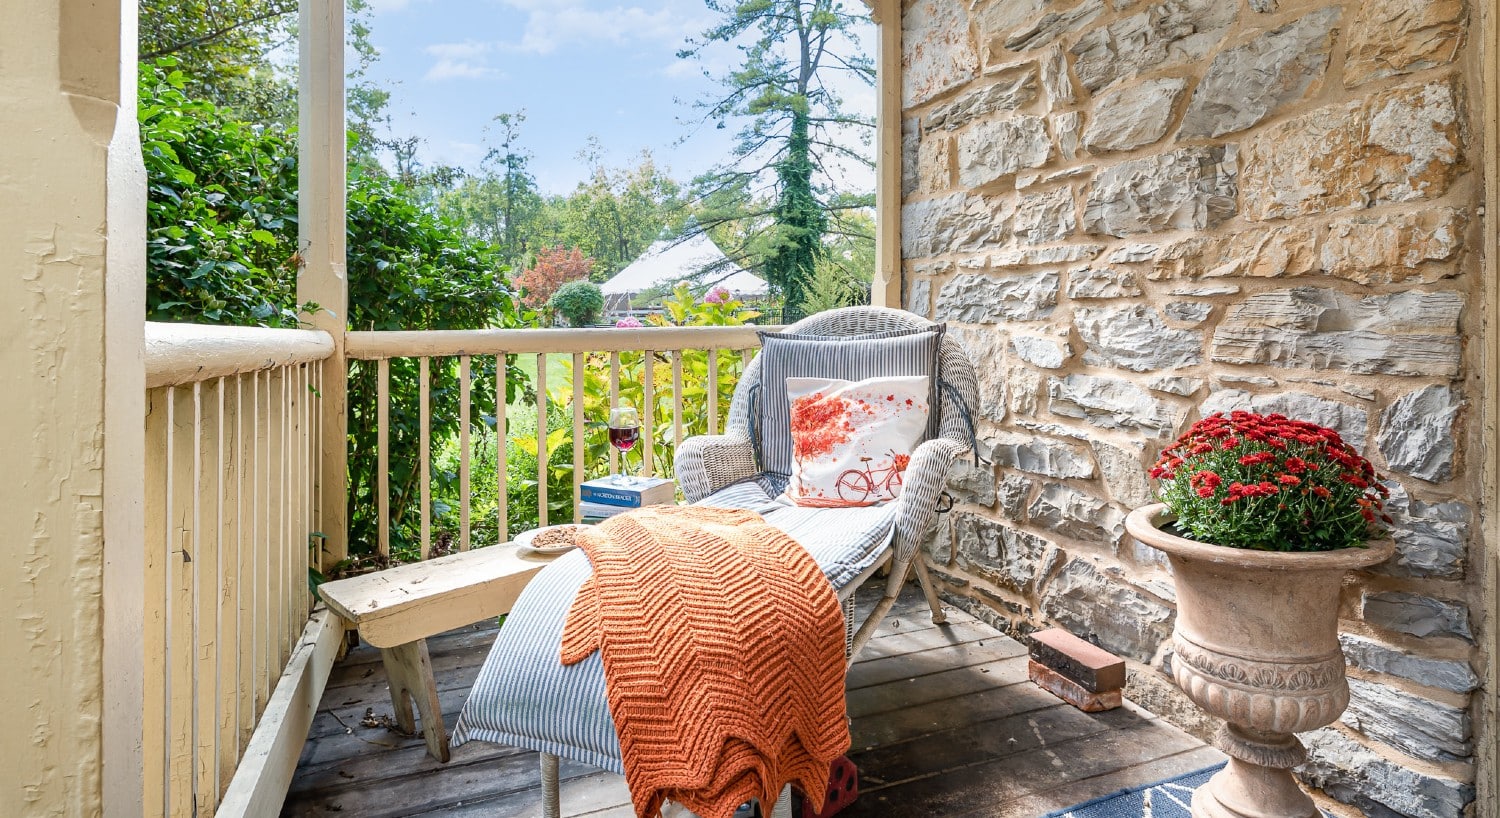 A wicker chaise lounge chair with pillow and orange blanket at the corner of an outdoor patio overlooking trees and a blue sky